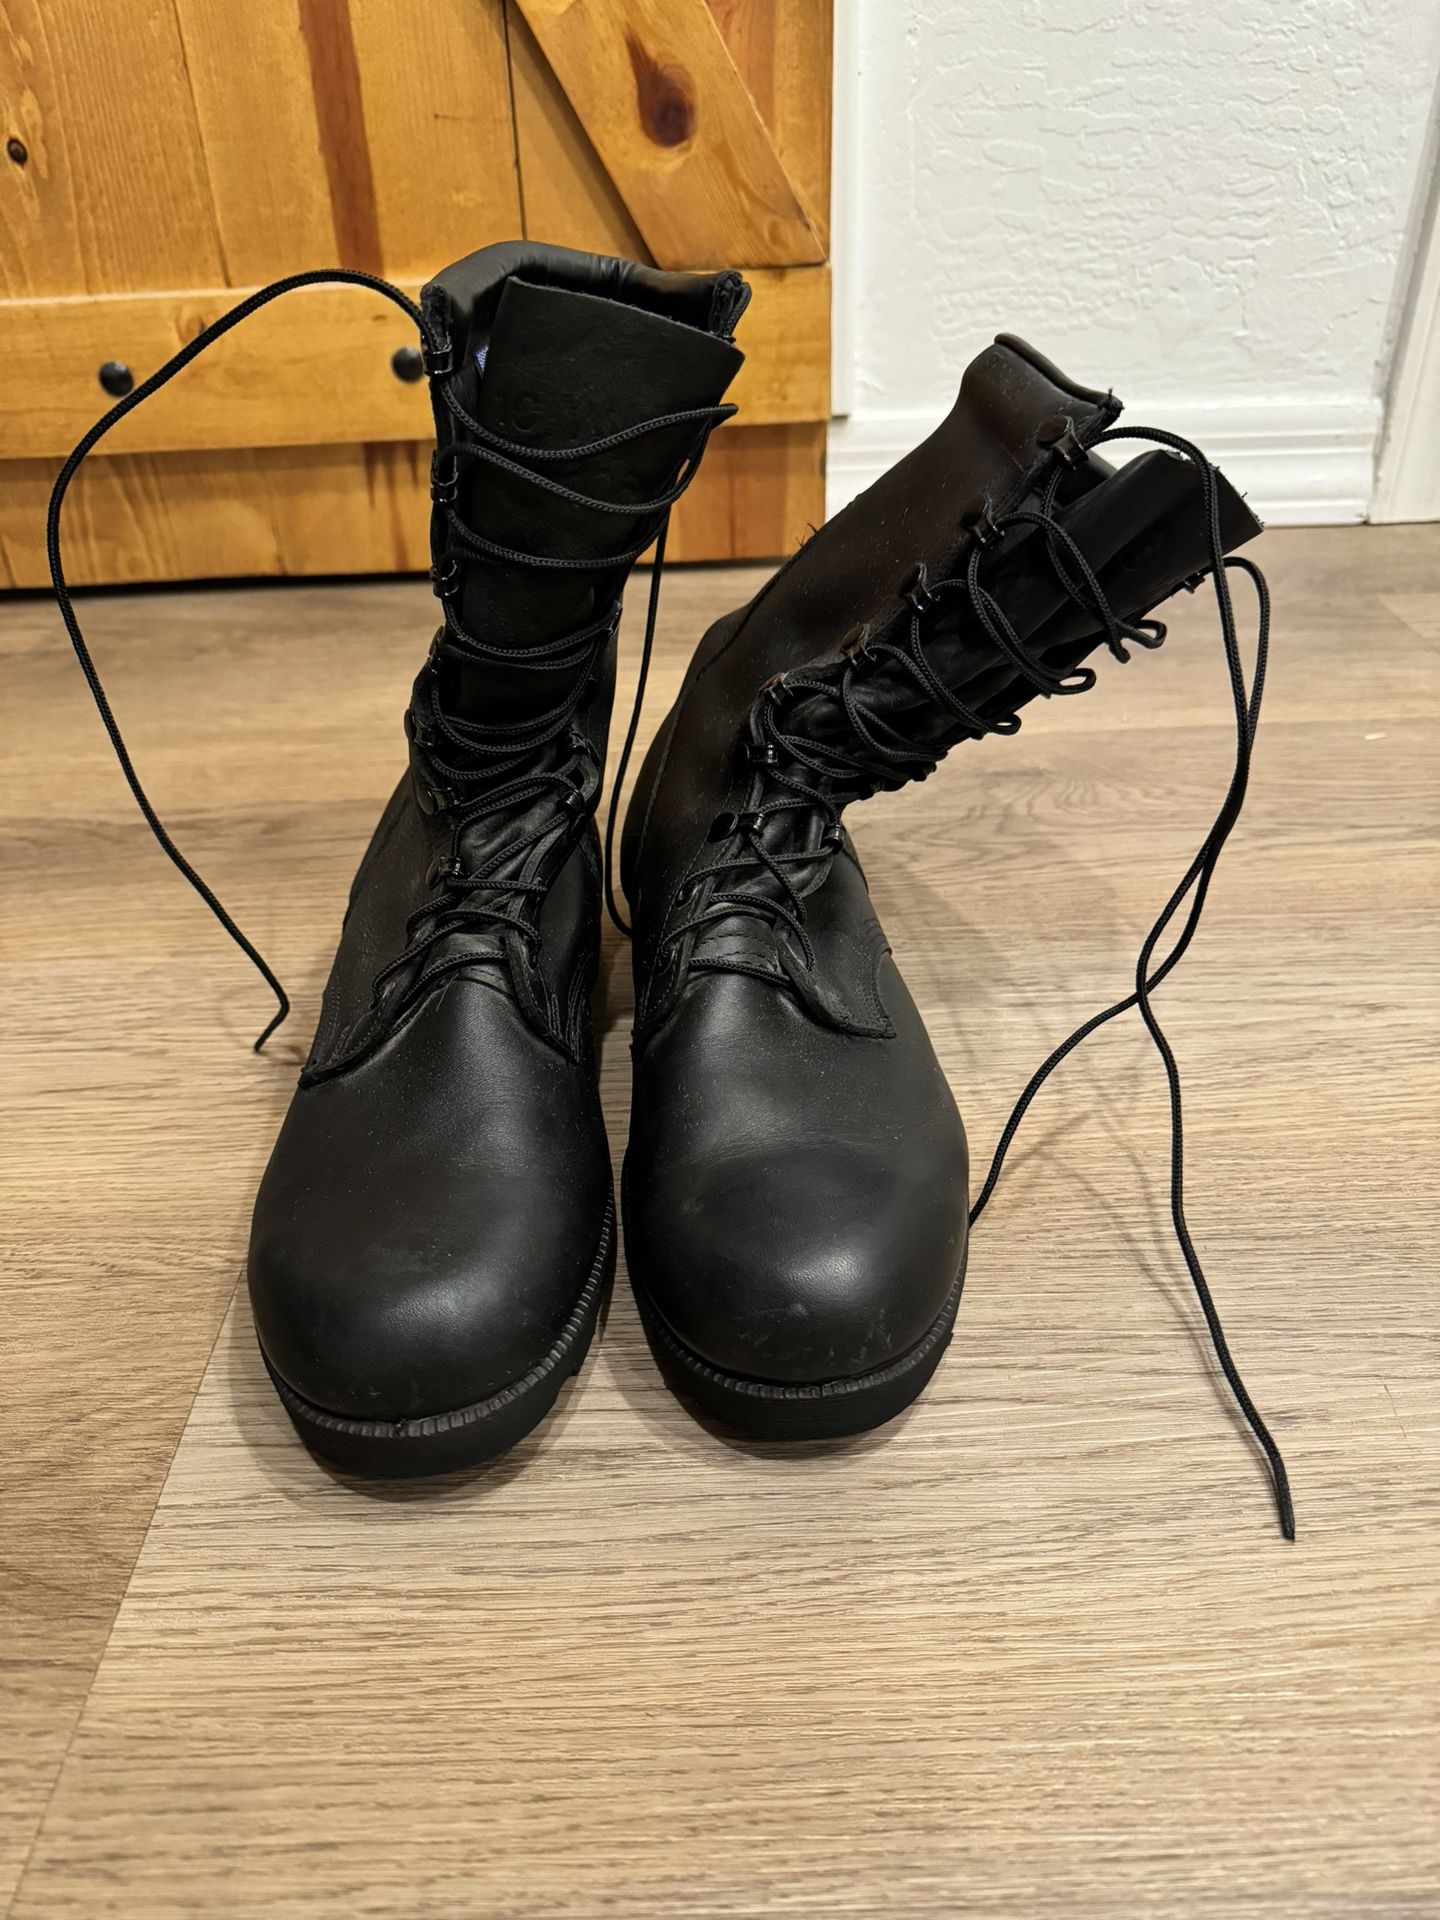 Vintage Wellco military combat boots,10W